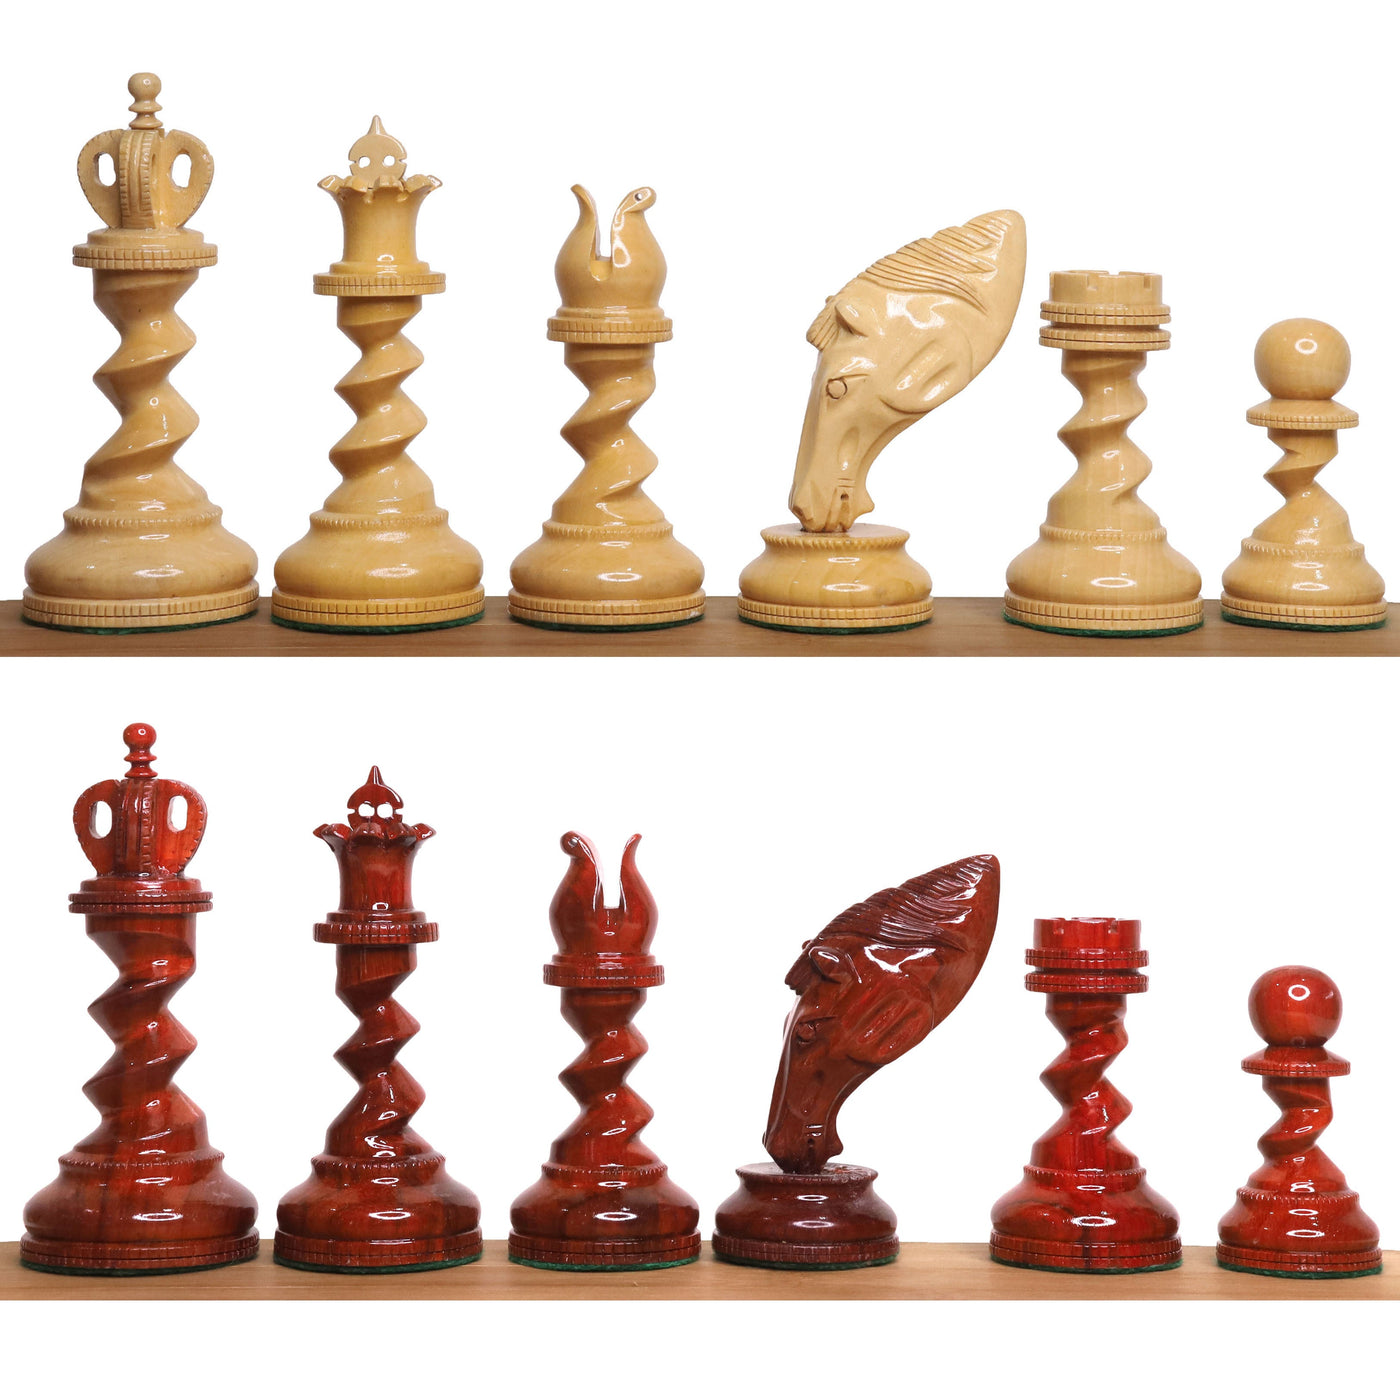 4.3" Grazing Knight Luxury Staunton Chess Set - Chess Pieces Only-Lacquered Bud Rosewood